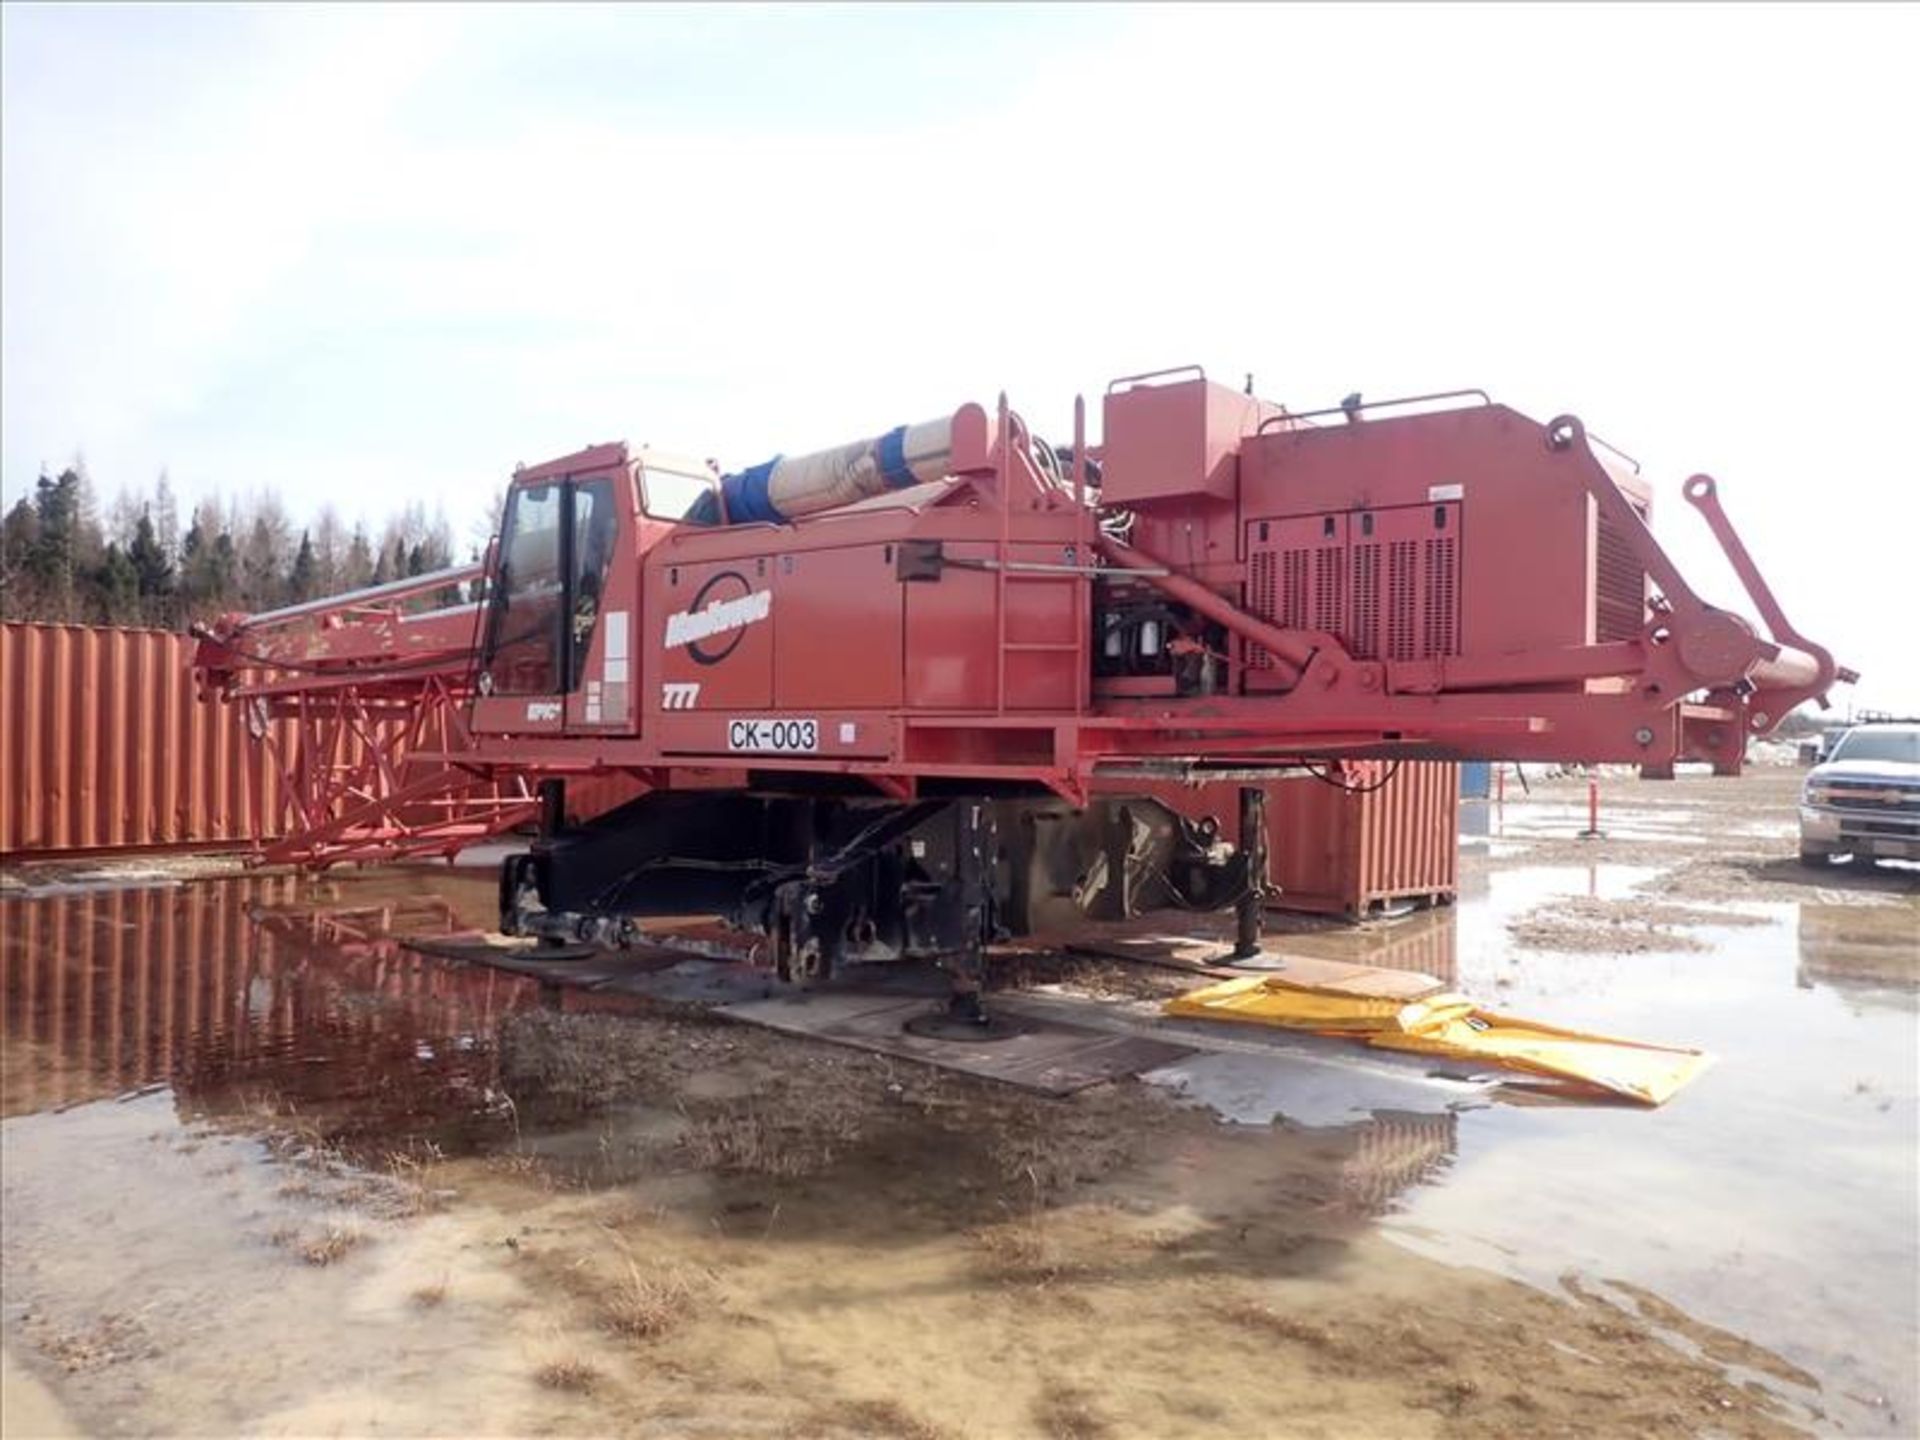 Manitowoc crane, mod. 777-52, 100-ton cap. w/ boom extension, counter weights, Shipping Container